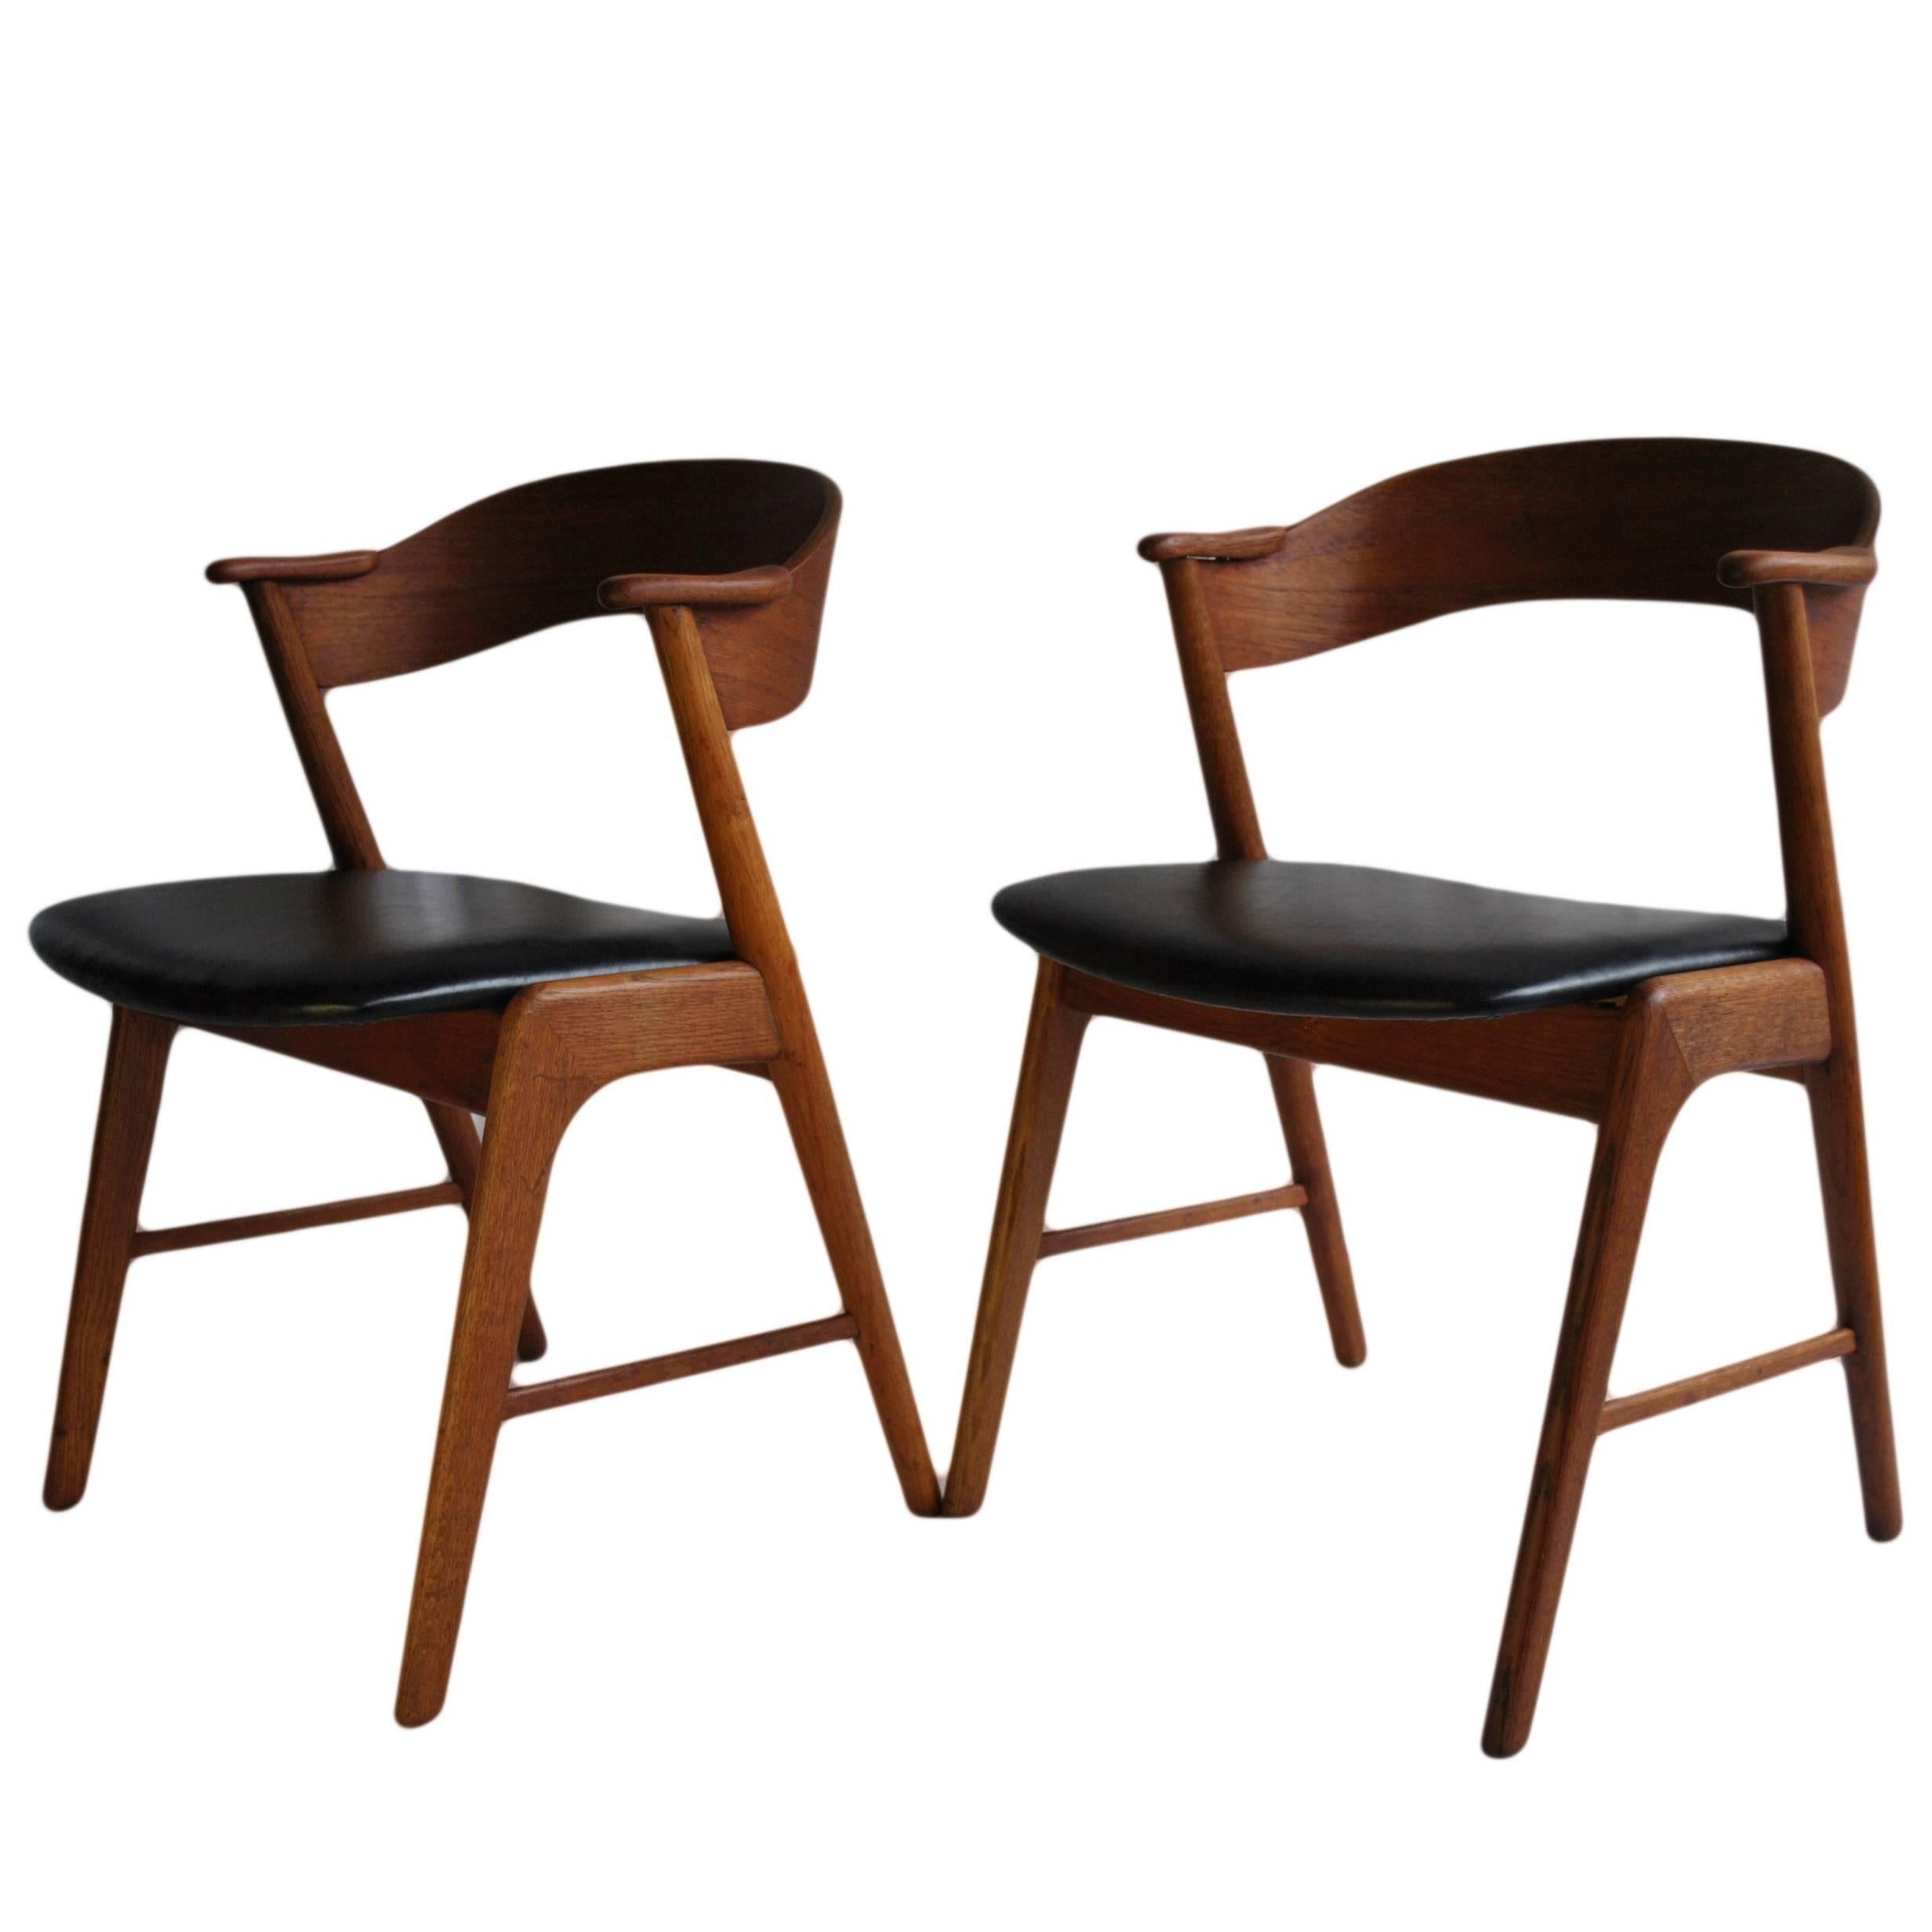 Pair of Kai Kristiansen Model 32 Chairs, repolished with New Leather.